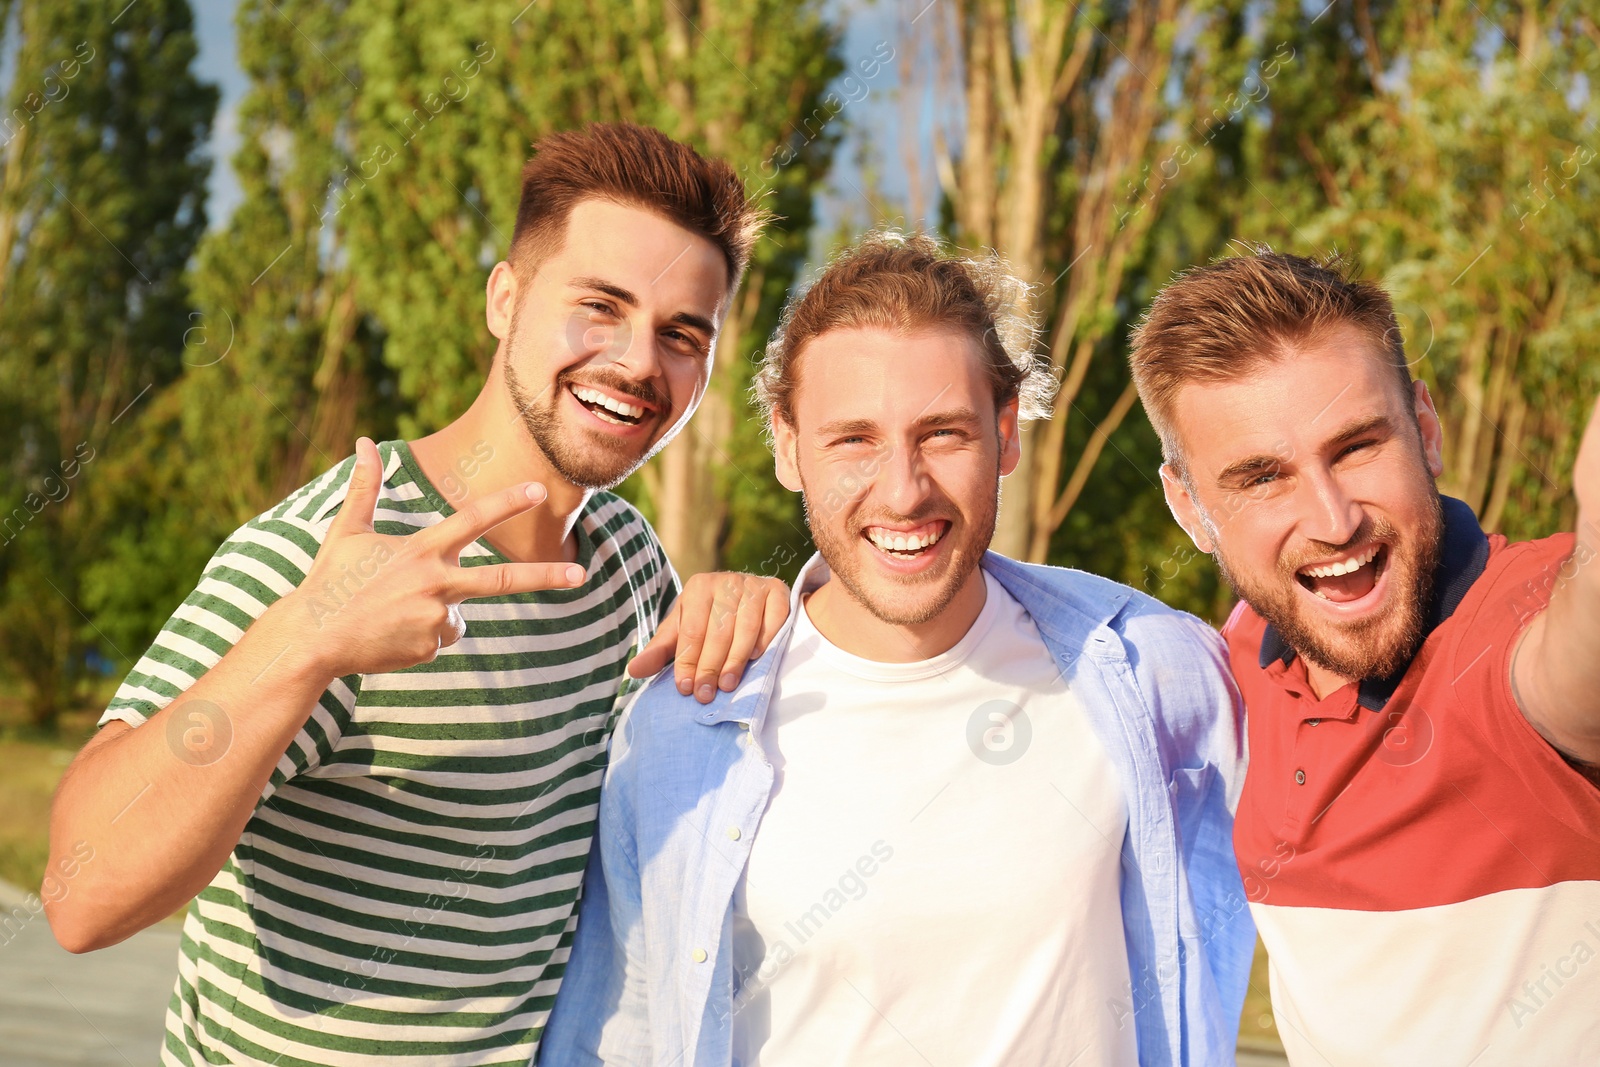 Photo of Happy young men taking selfie outdoors on sunny day